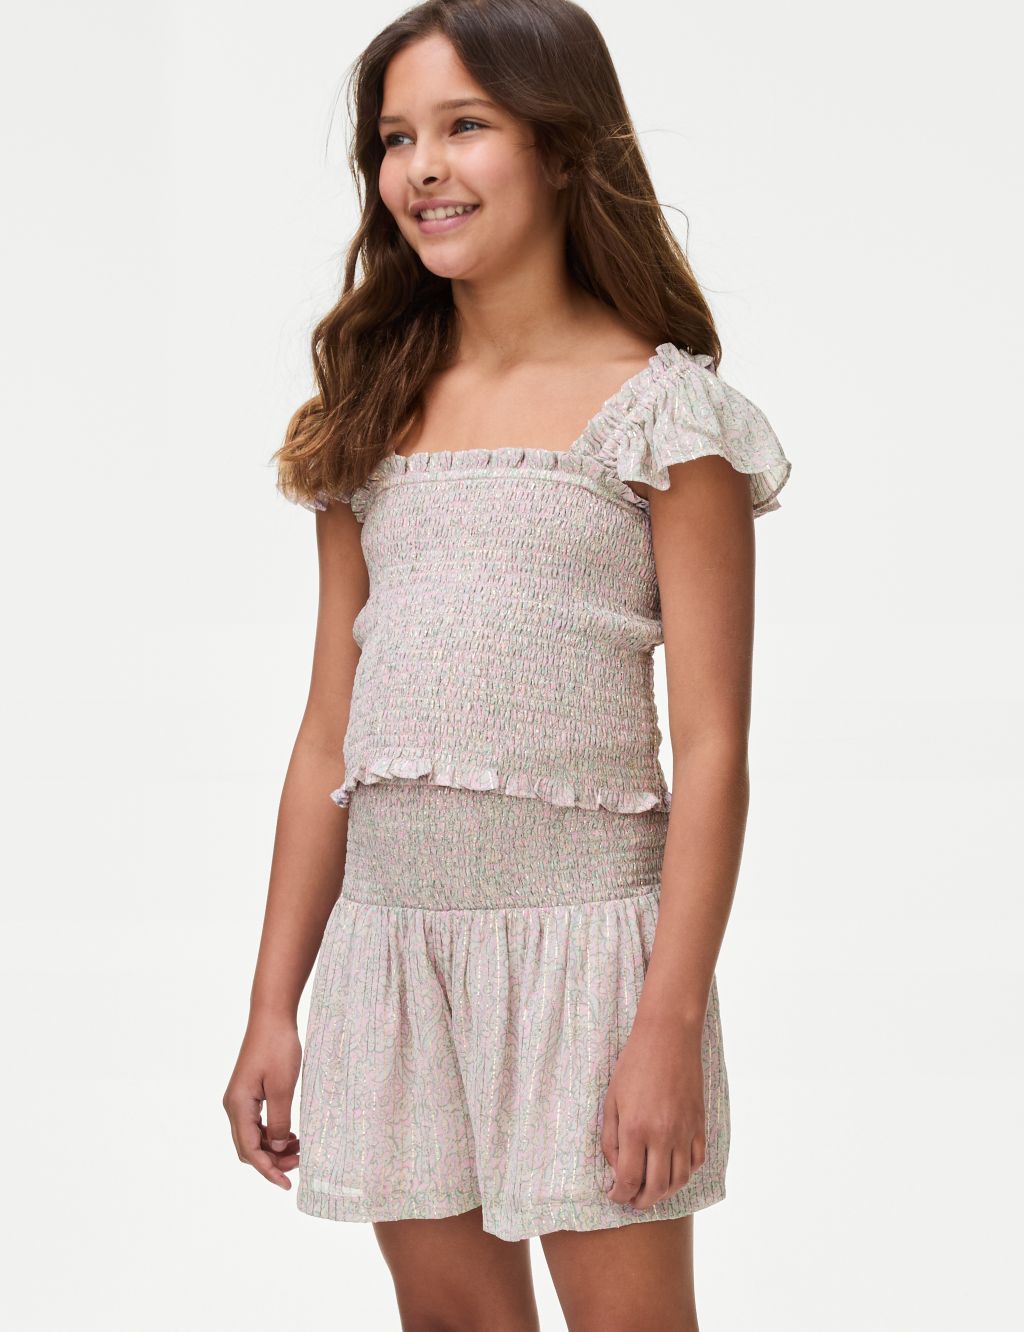 Sparkly Shirred Top (6-16 Yrs)